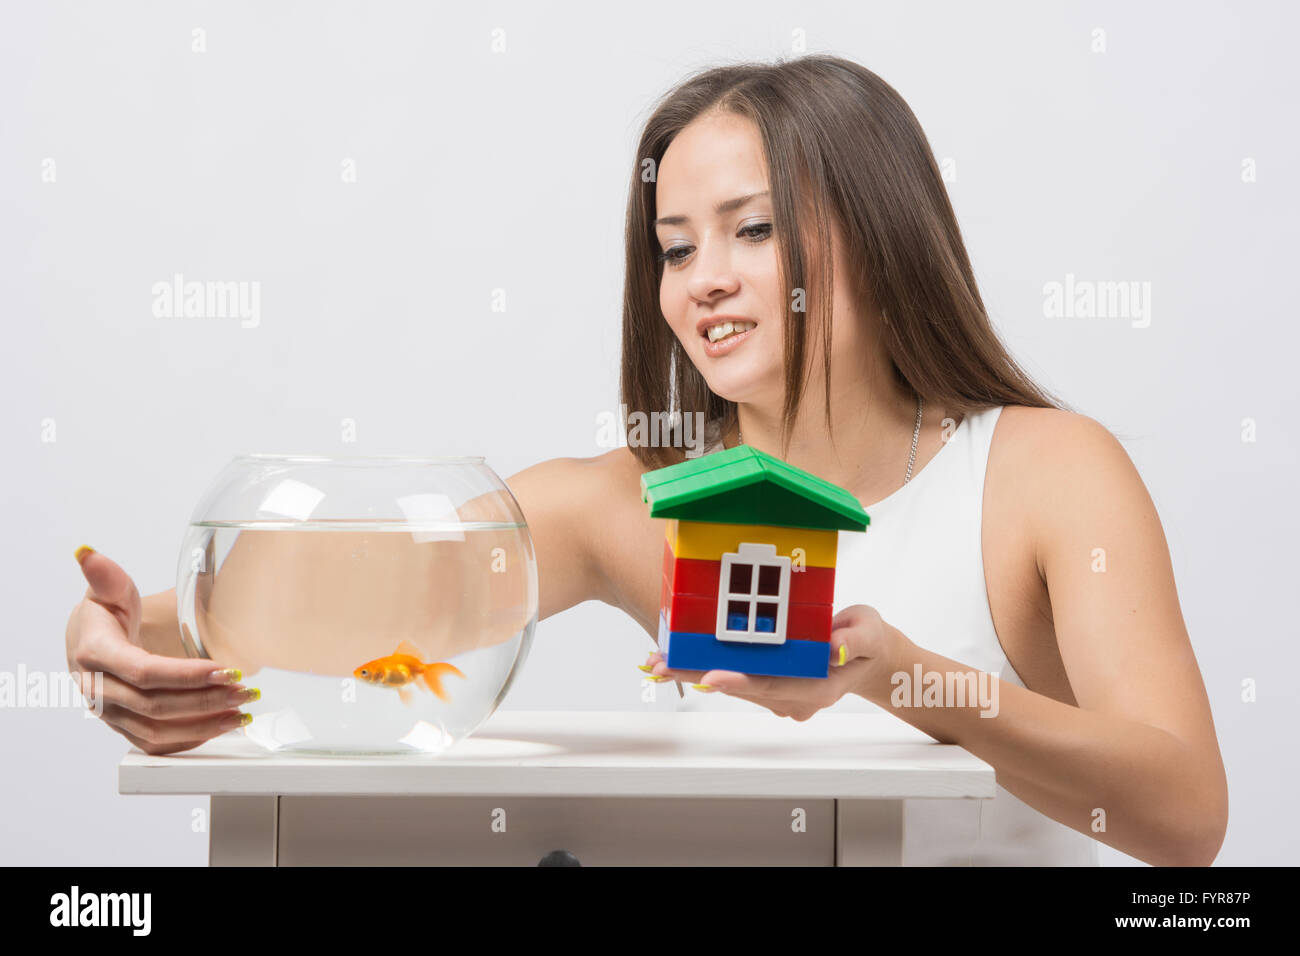 She knocks on the wall of the aquarium with goldfish and the other hand holding a toy house Stock Photo